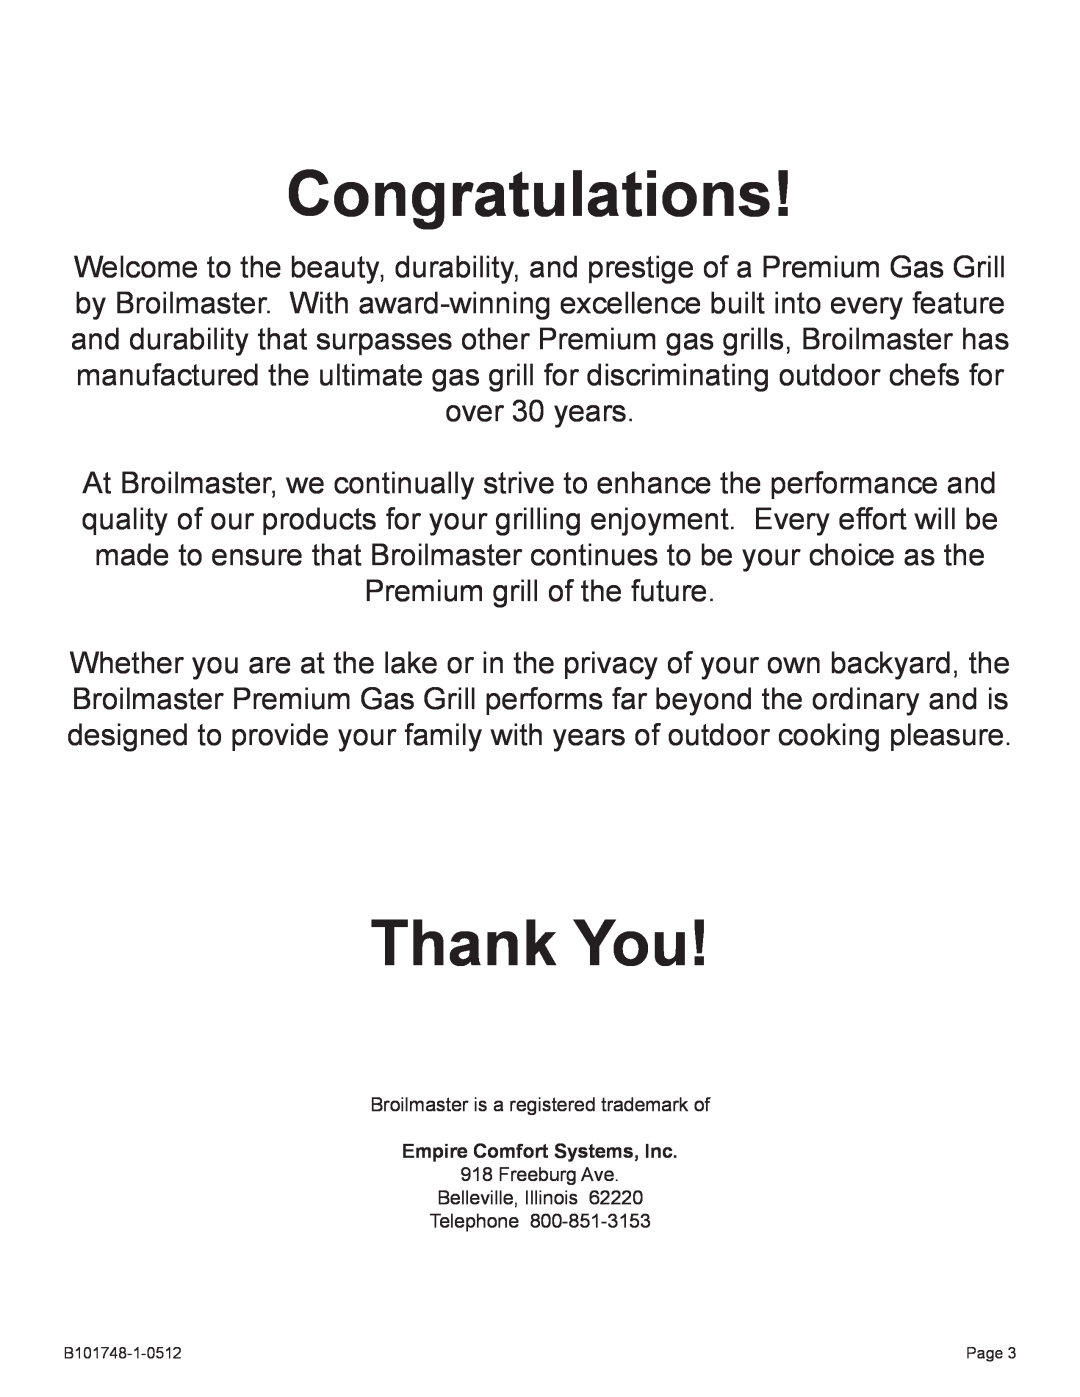 Broilmaster Q3XN-1 owner manual Congratulations, Thank You, Empire Comfort Systems, Inc 